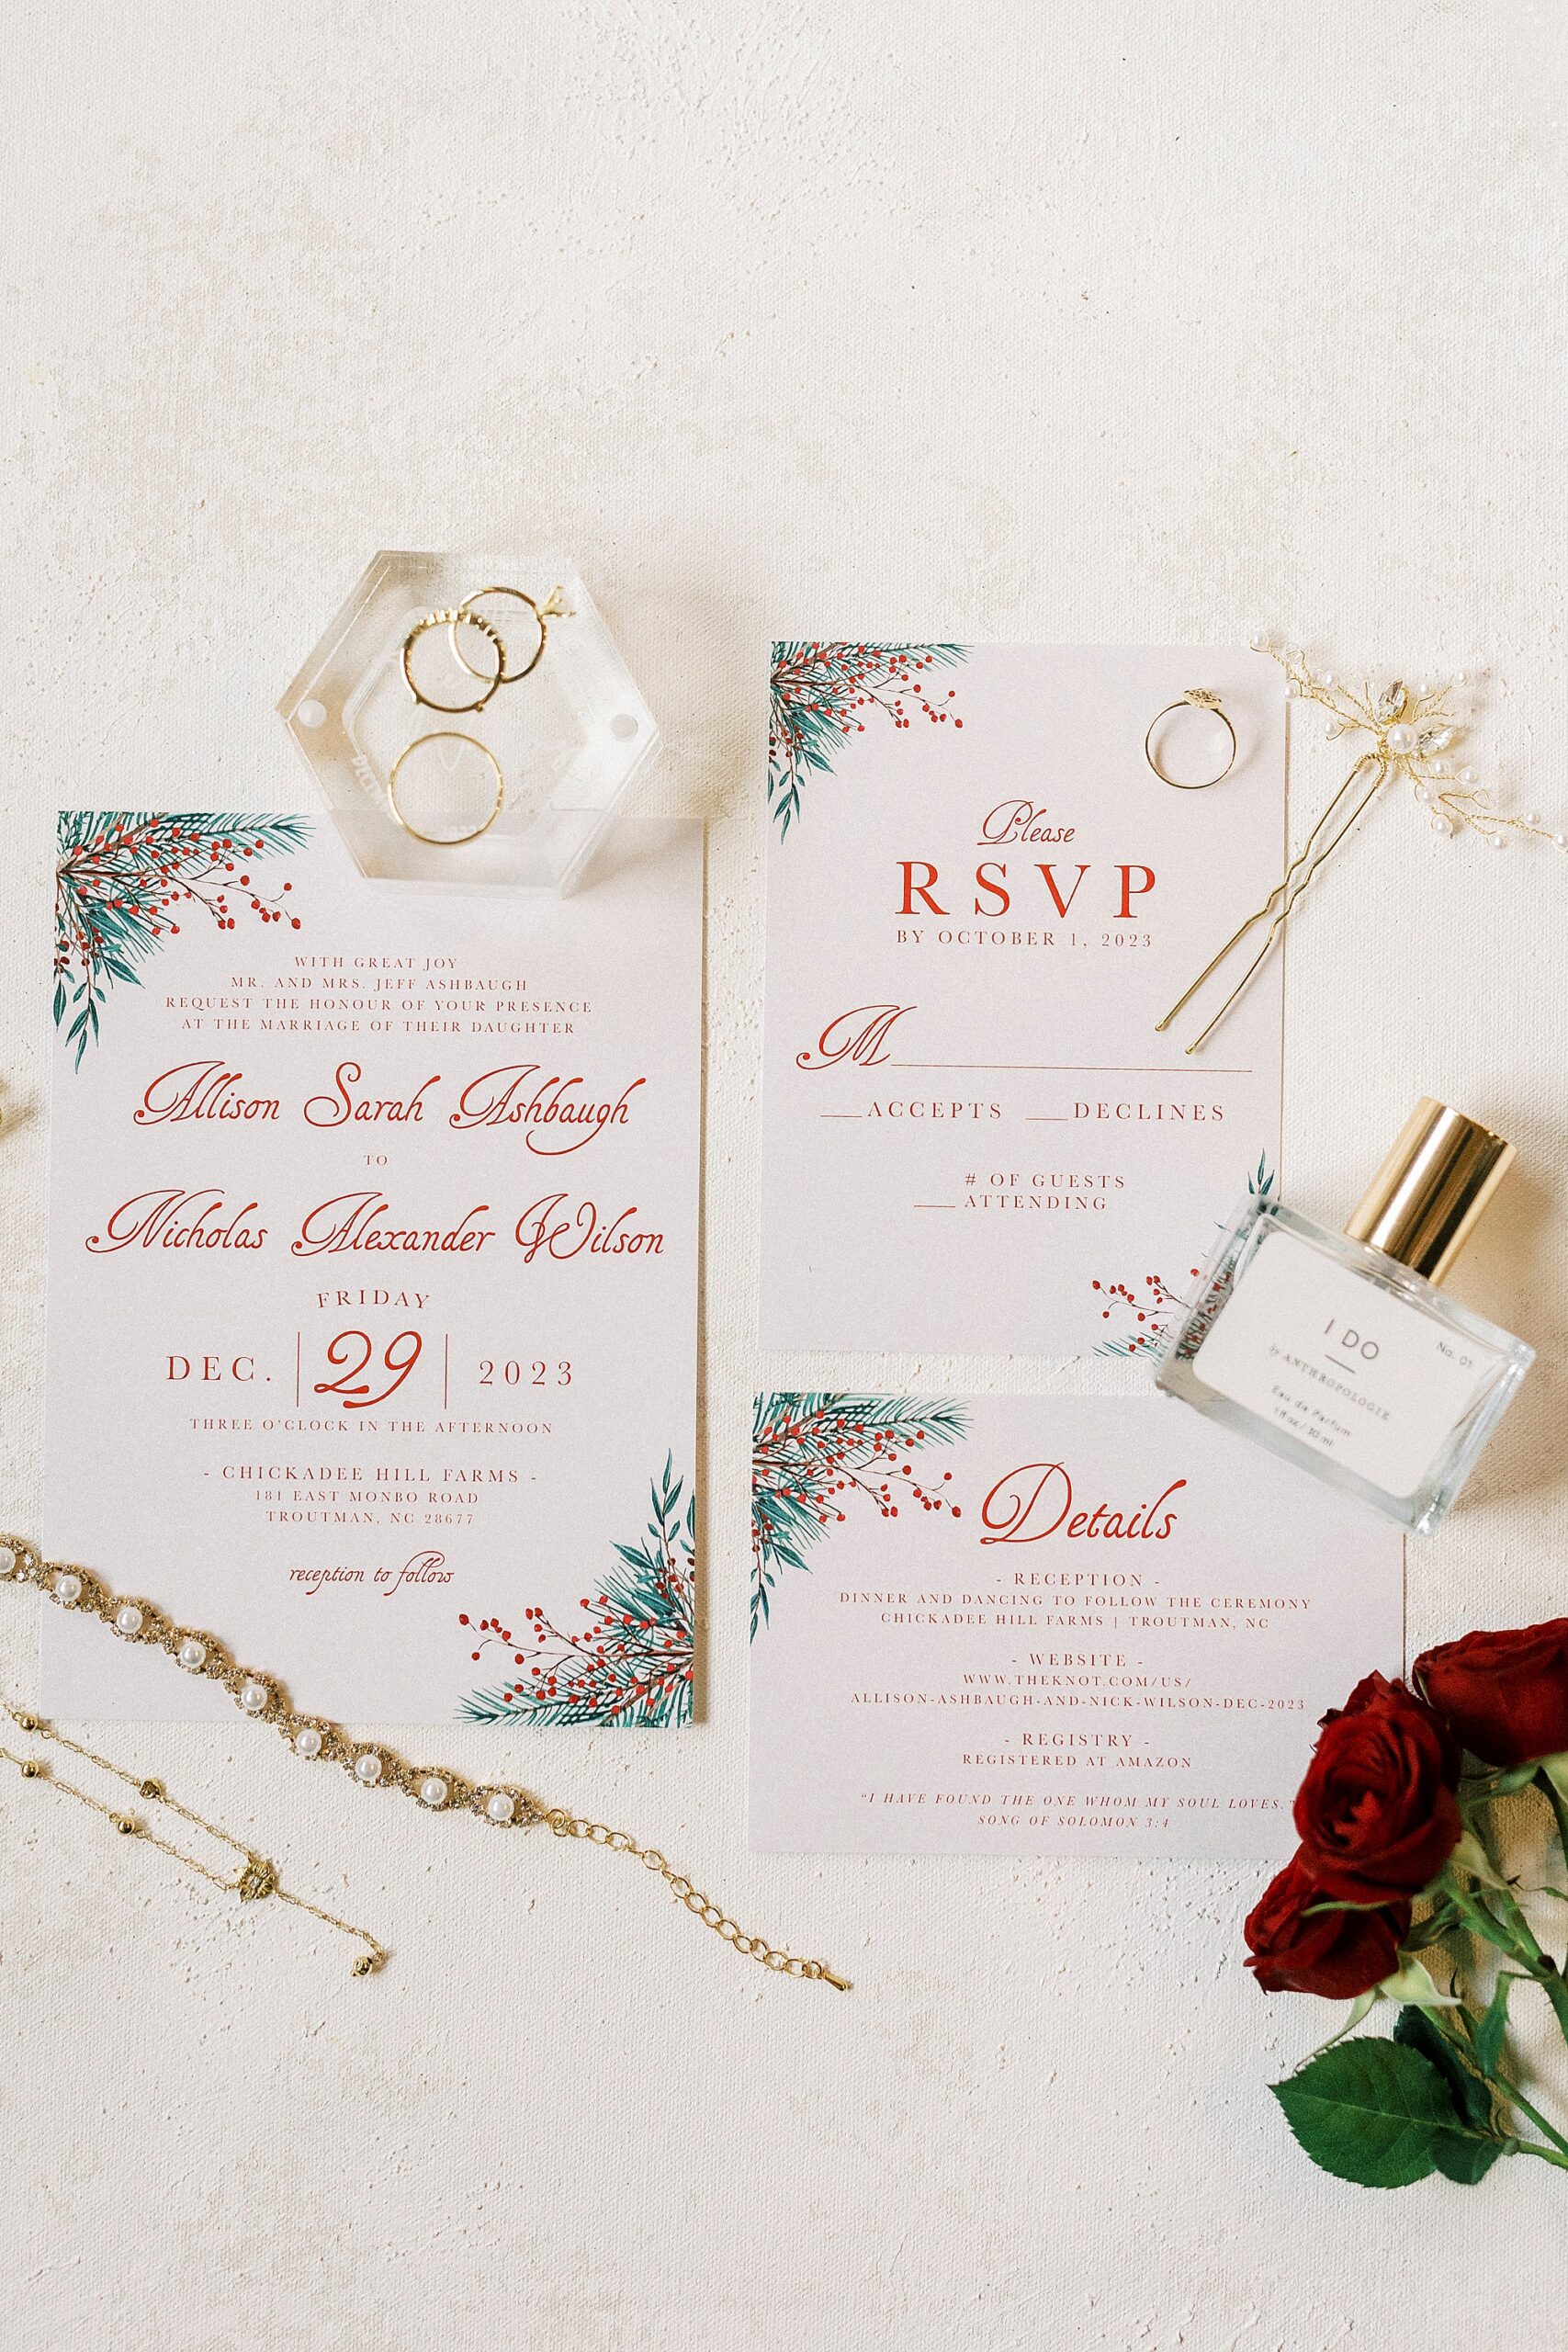 red, white, and green invitation suite for holiday wedding at Chickadee Hill Farms